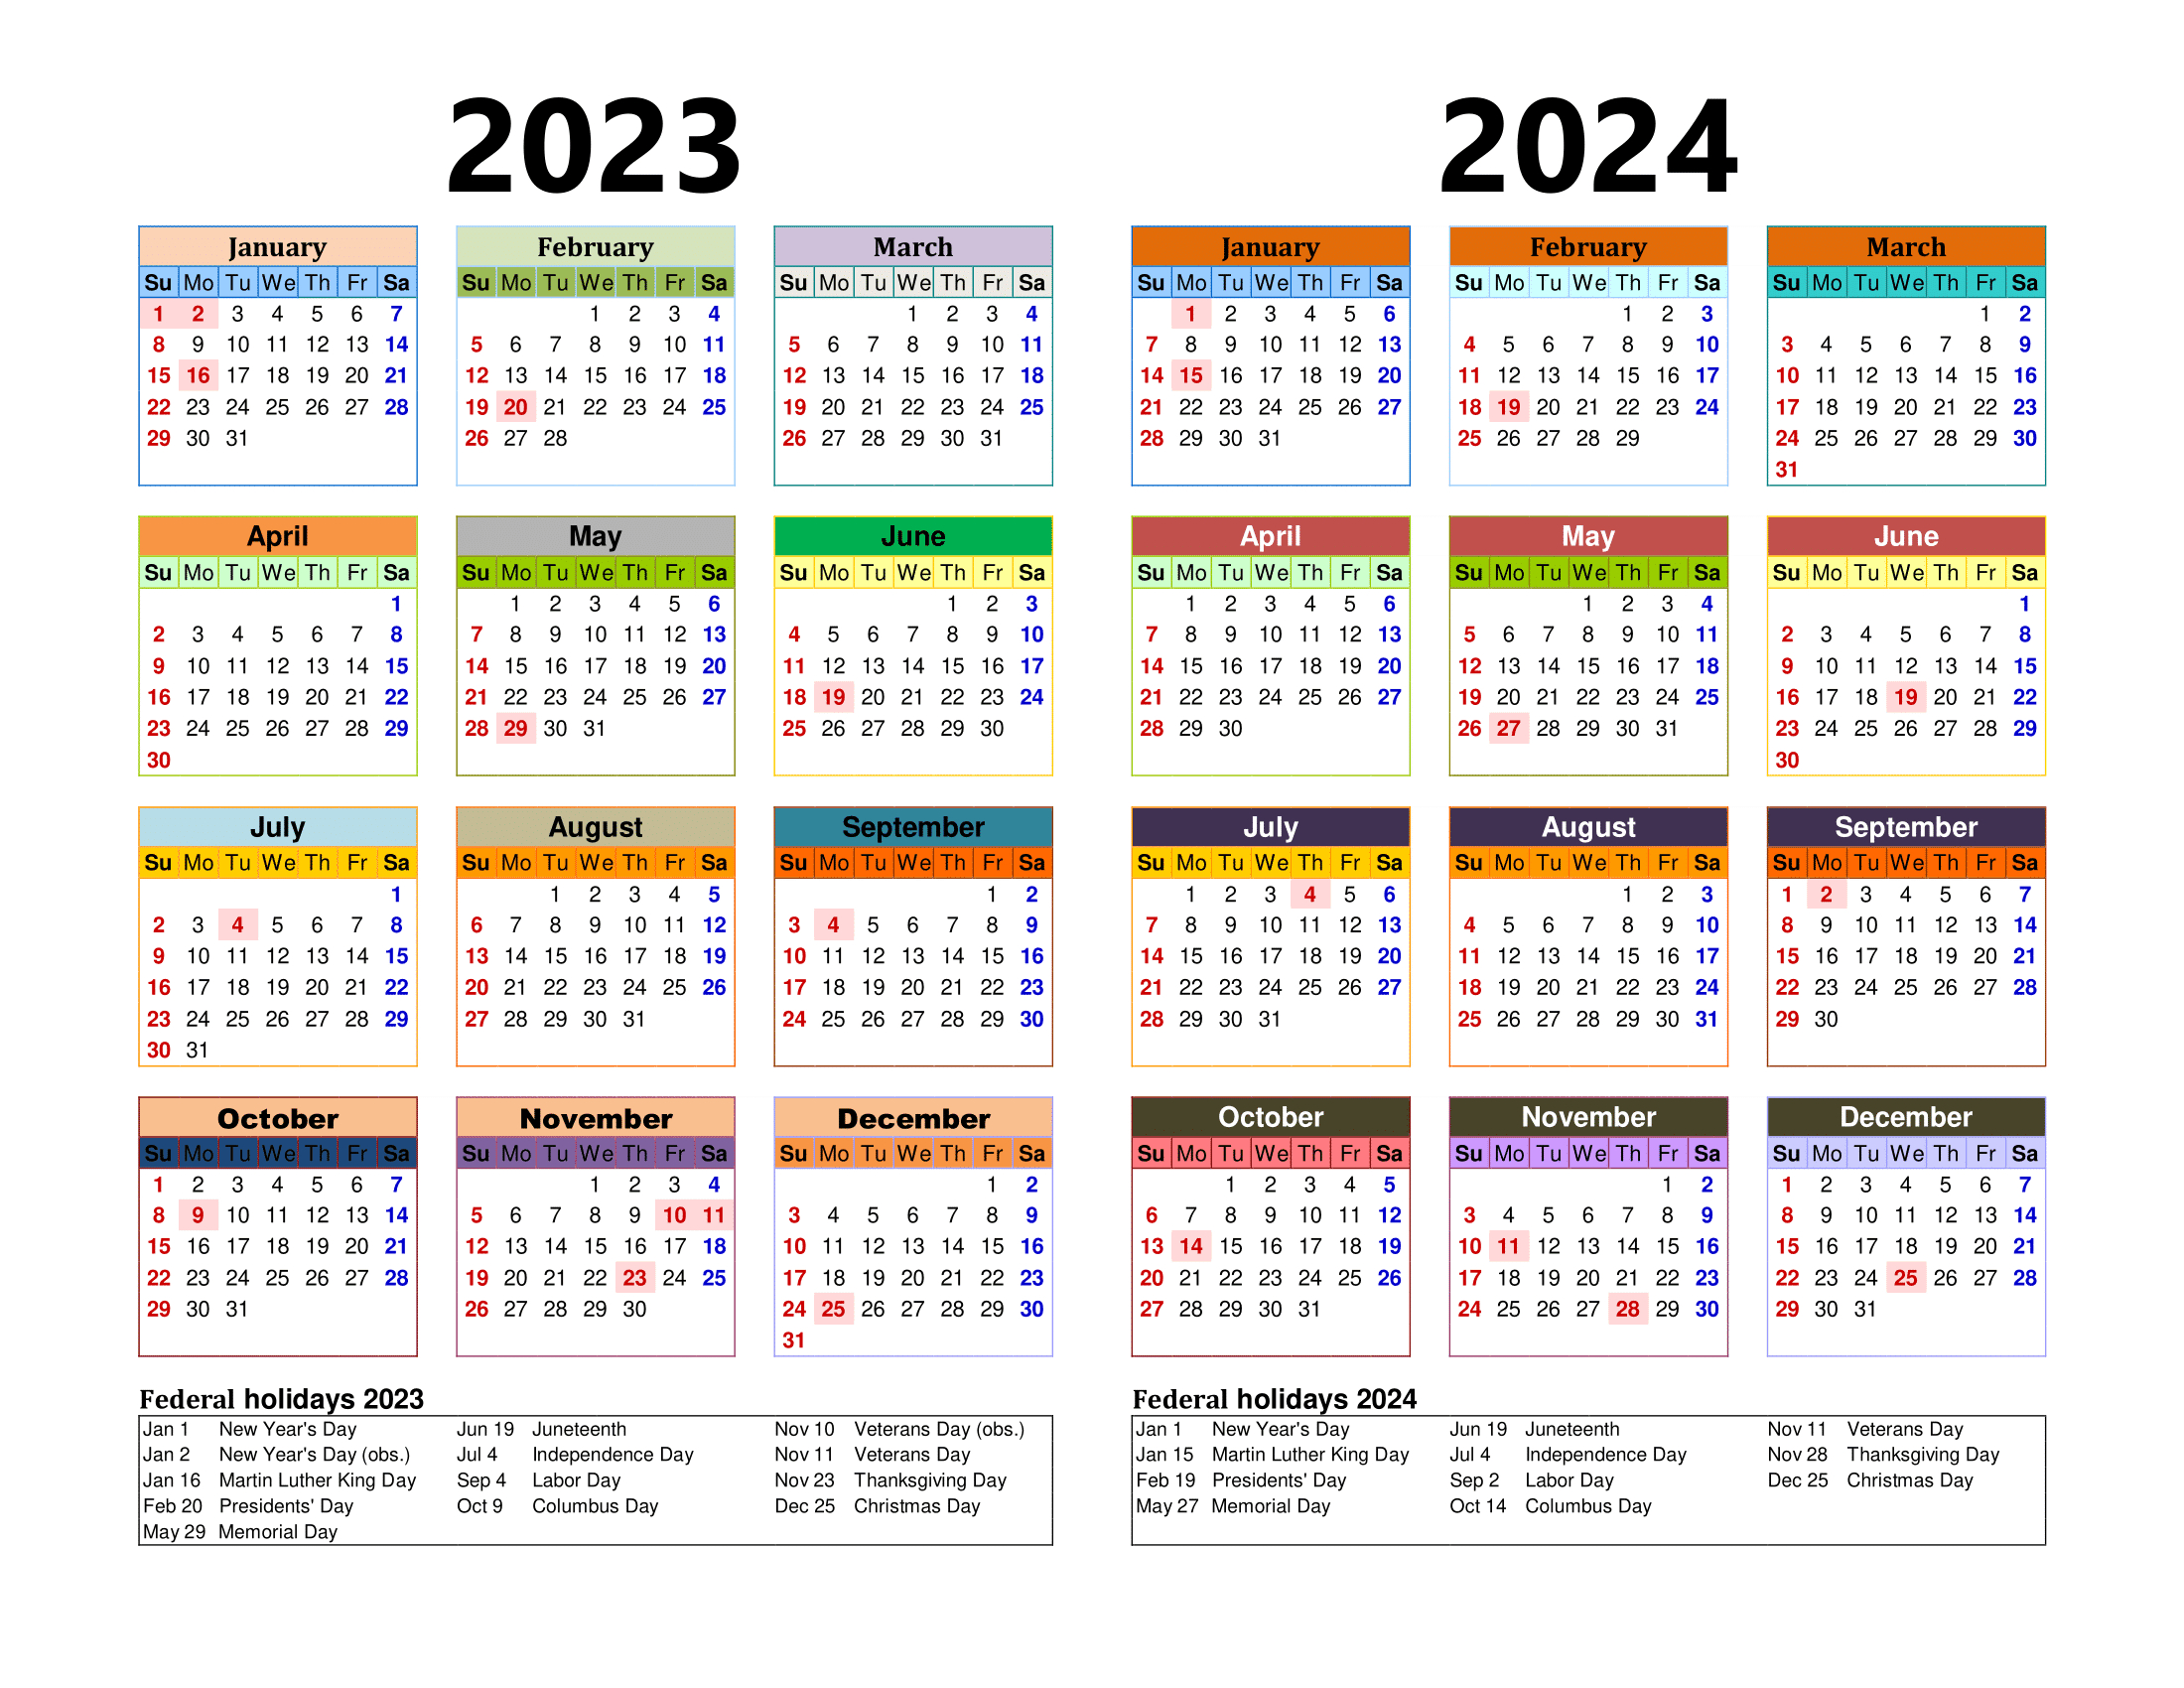 Free Printable Two Year Calendar Templates For 2023 And 2024 In Pdf | 2023 2024 Monthly Calendar Printable